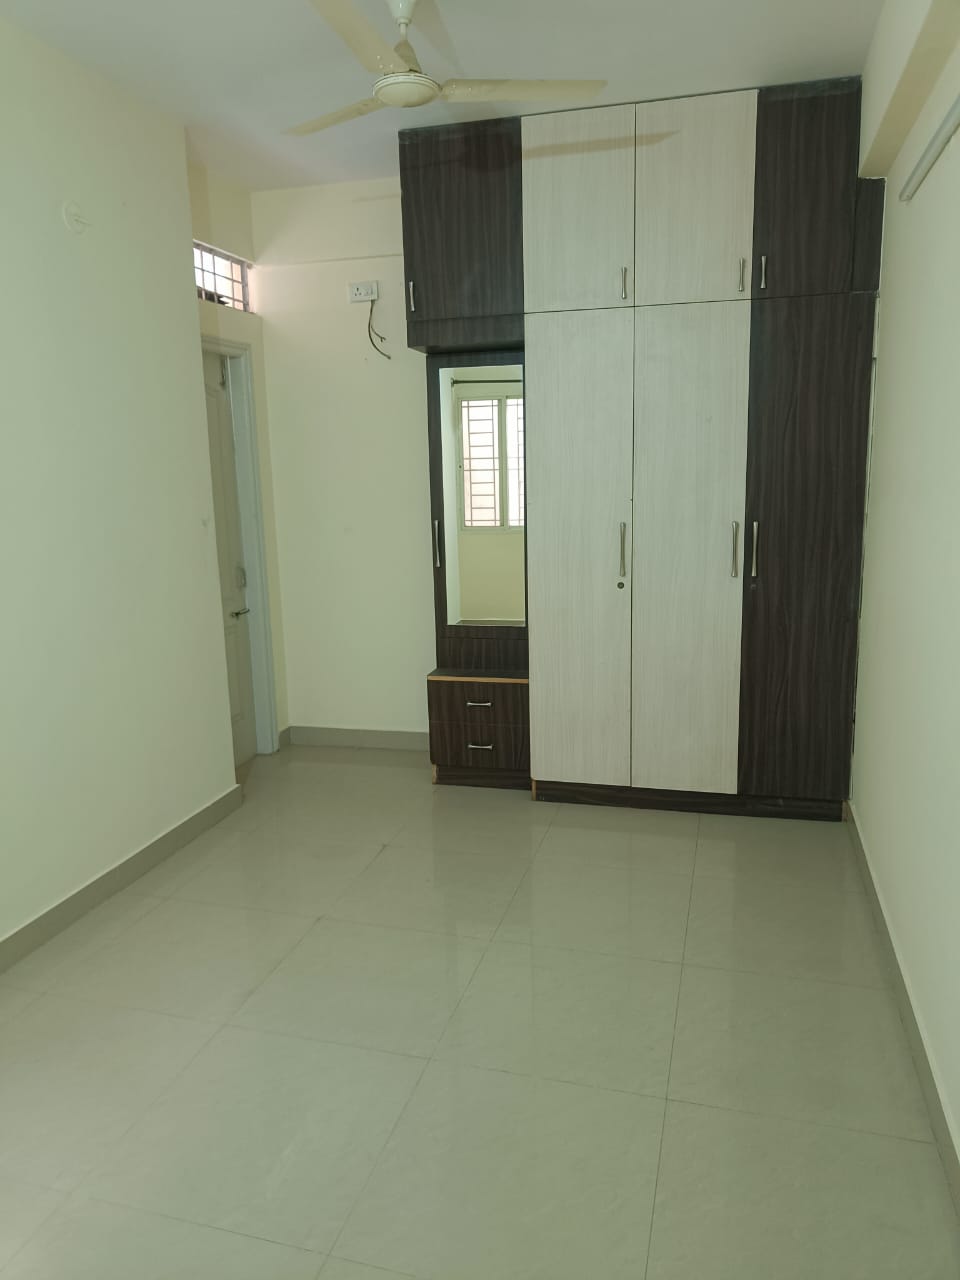 1 BHK Residential Apartment for Lease Only at JAML2 - 1813 in Babusapalya